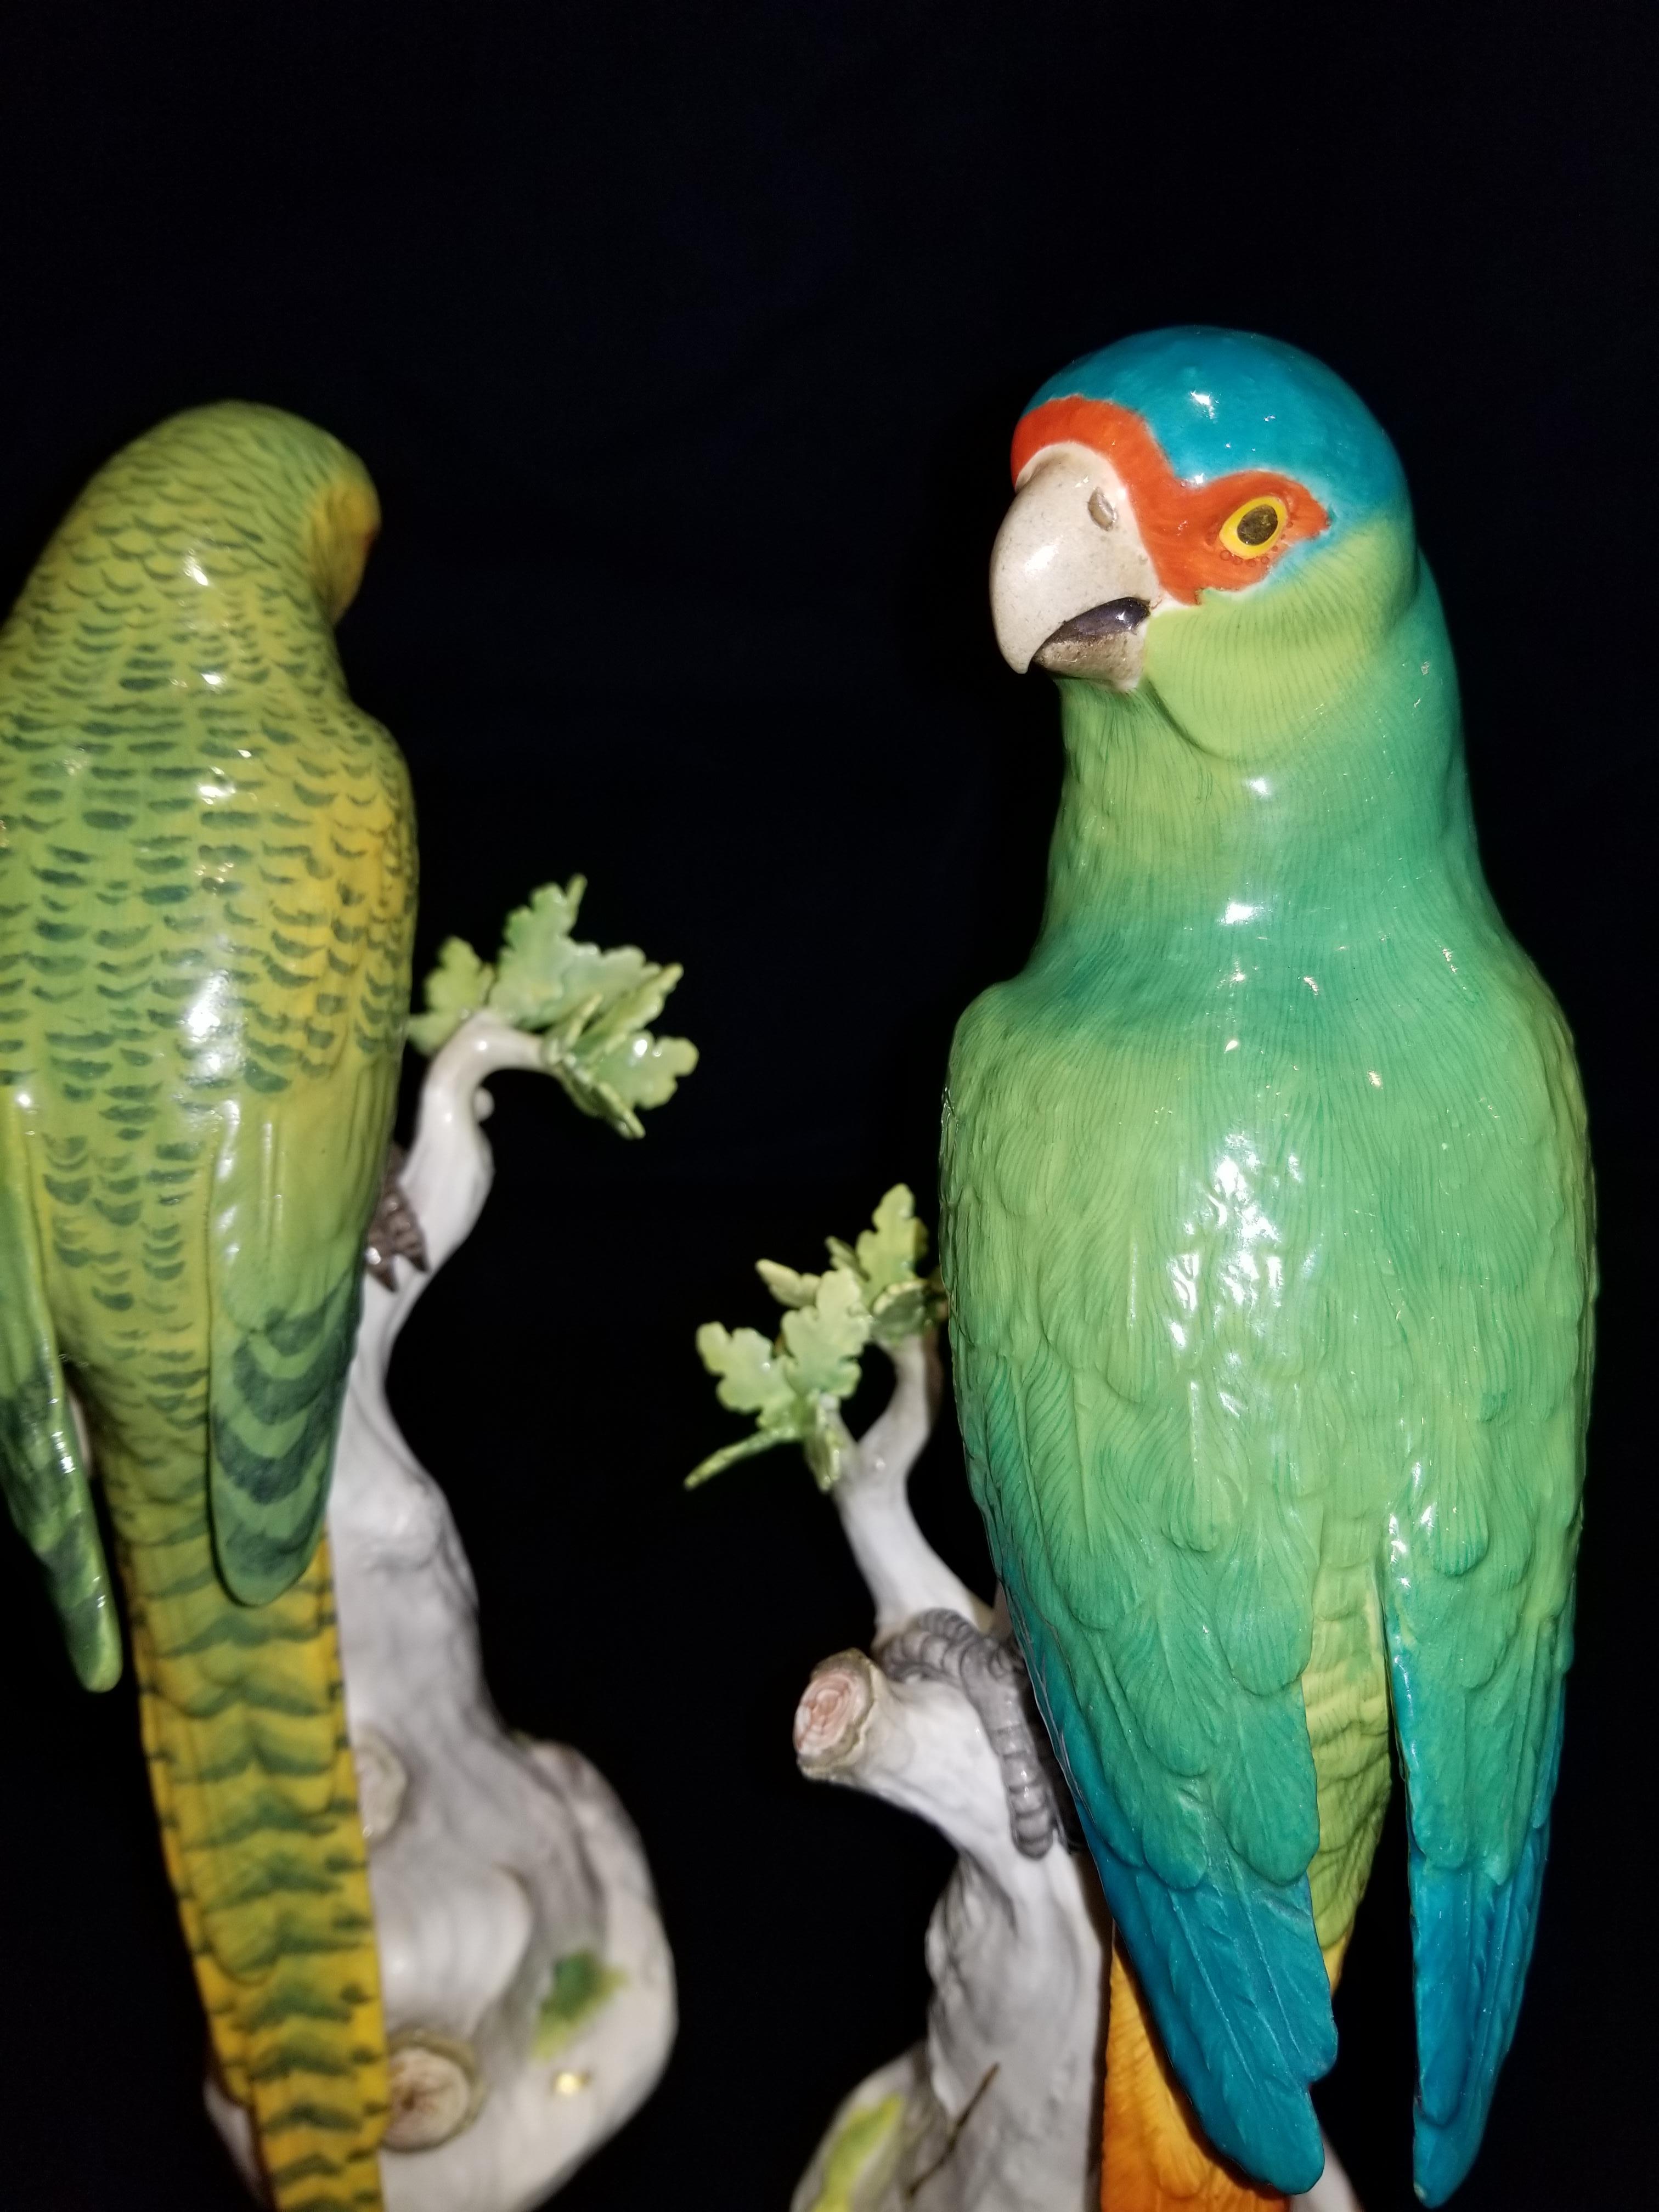 Meissen Porcelain Figures of Parrots Standing on Tree Branches with Leaves, Pair 1